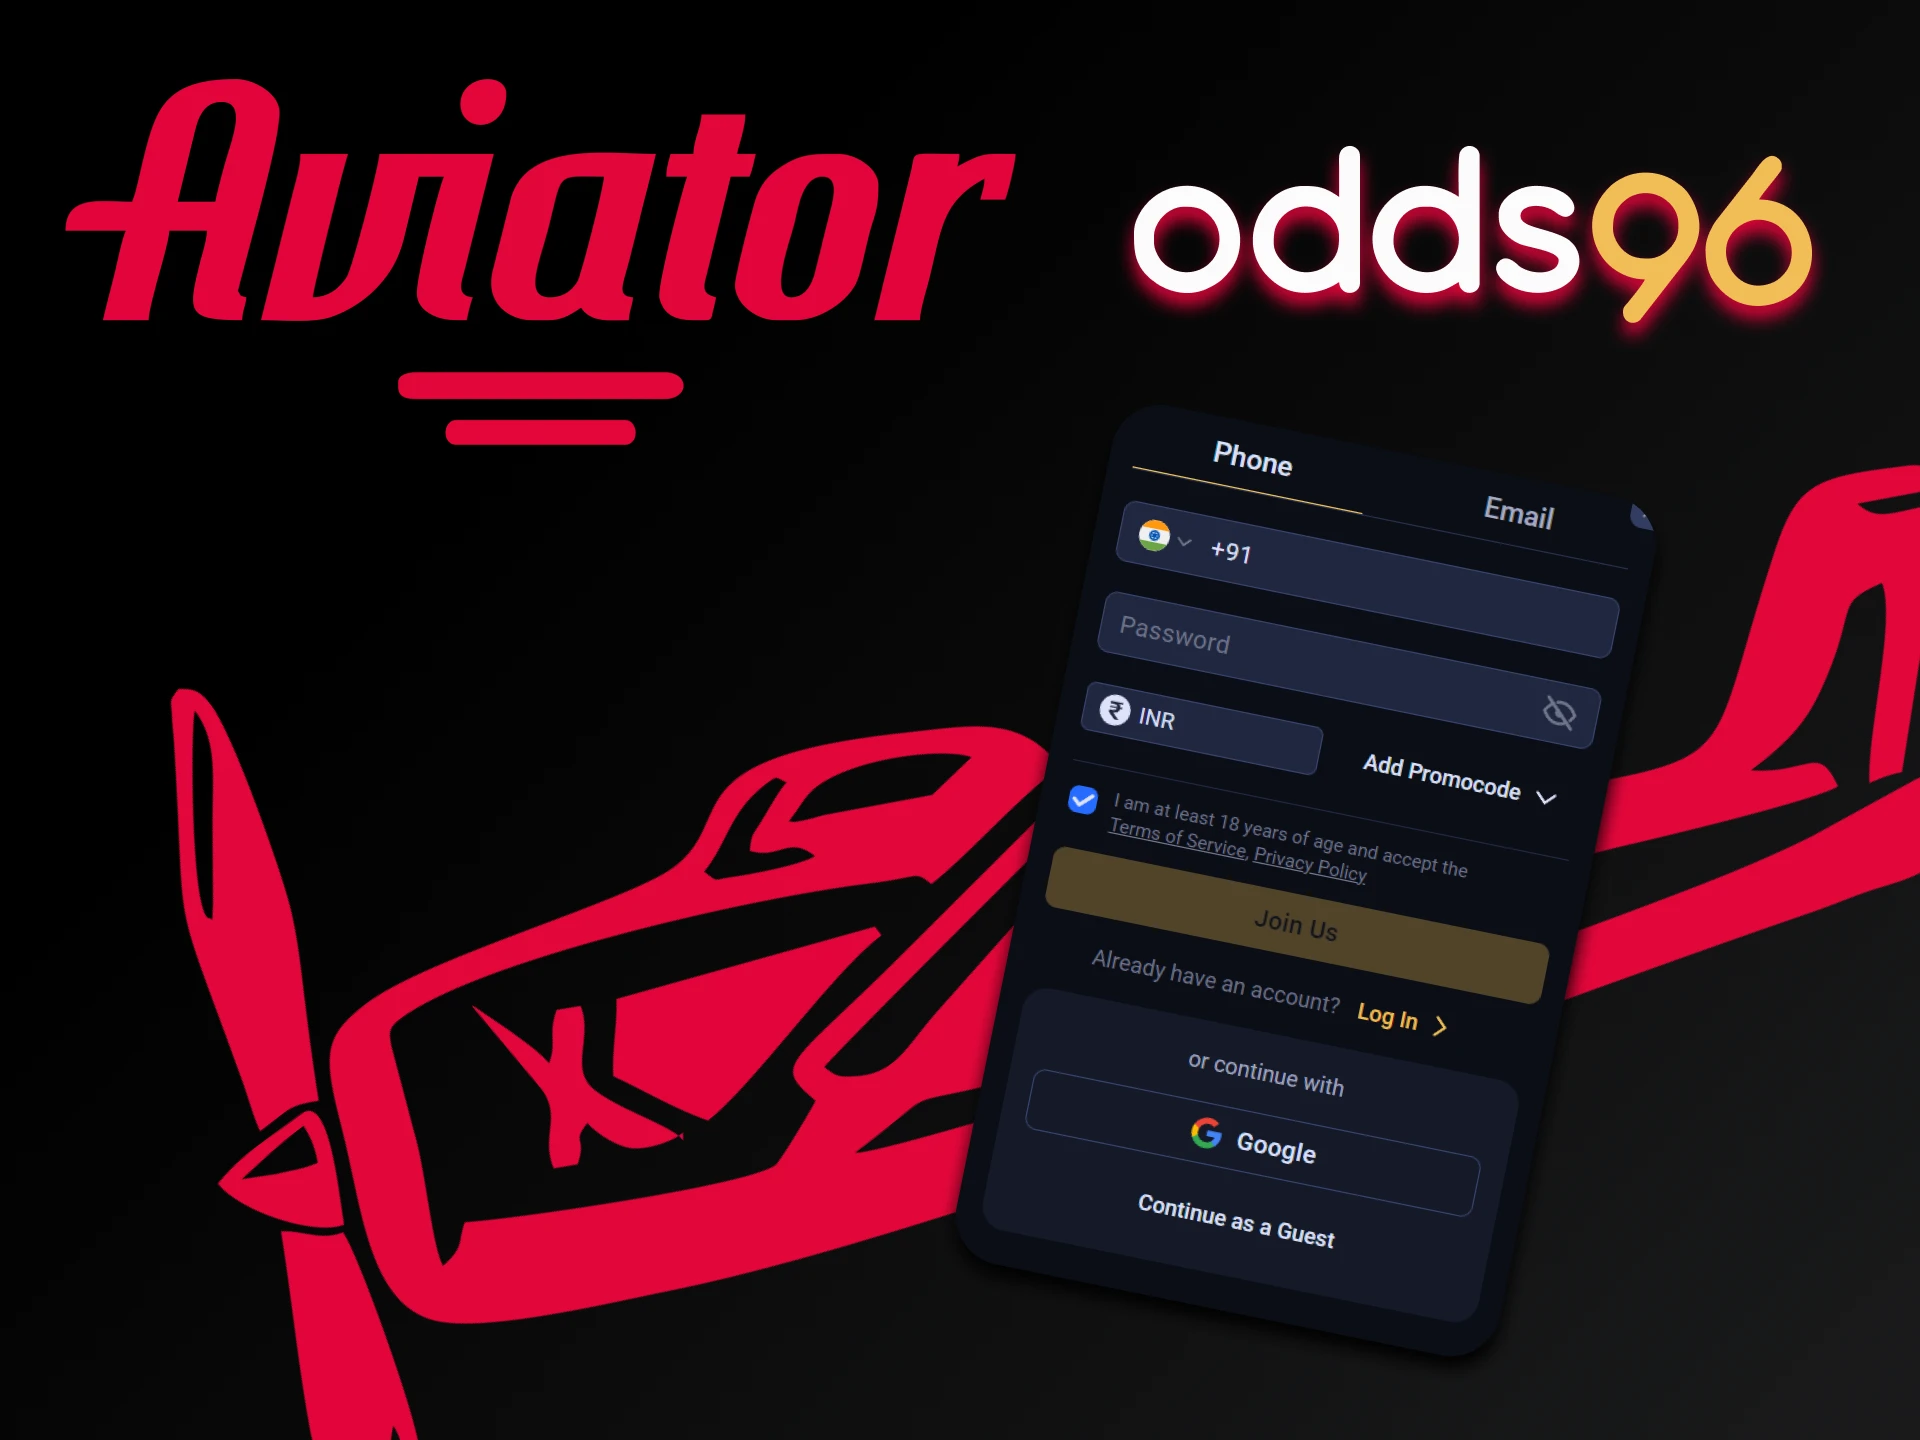 Go through the registration process on odds96 to play Aviator.